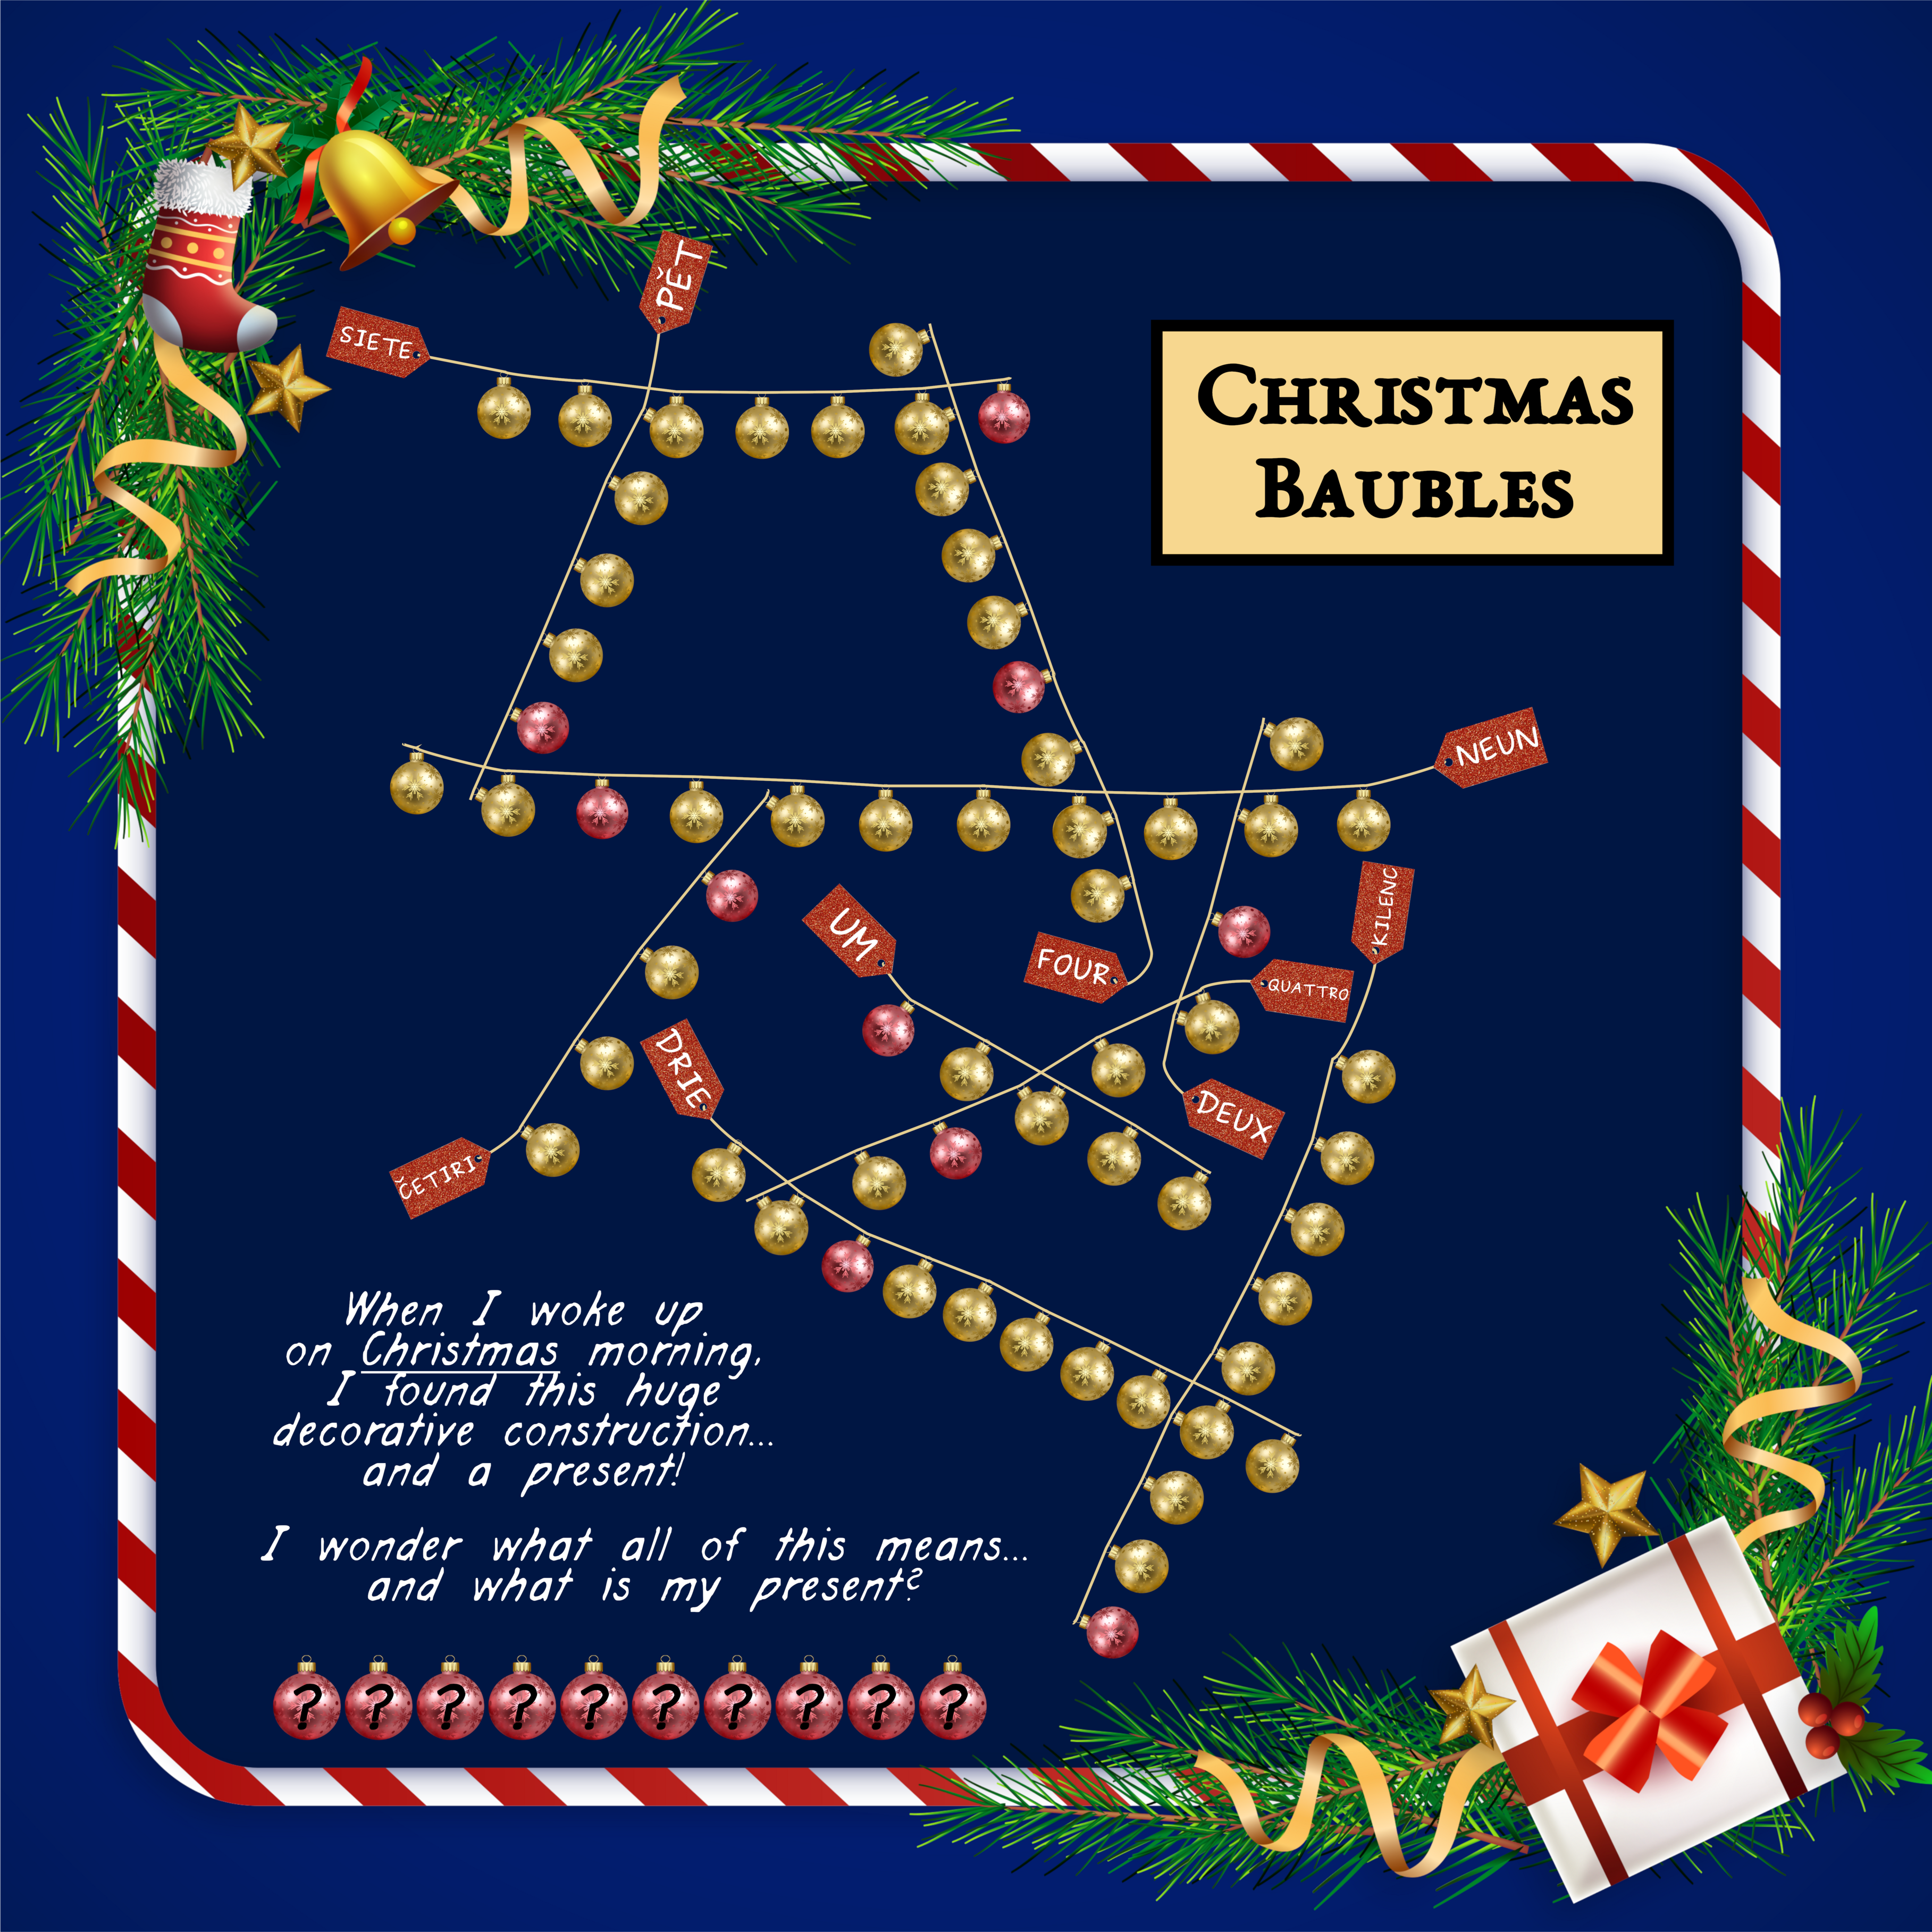 Christmas Baubles Puzzle (click for maximal resolution)